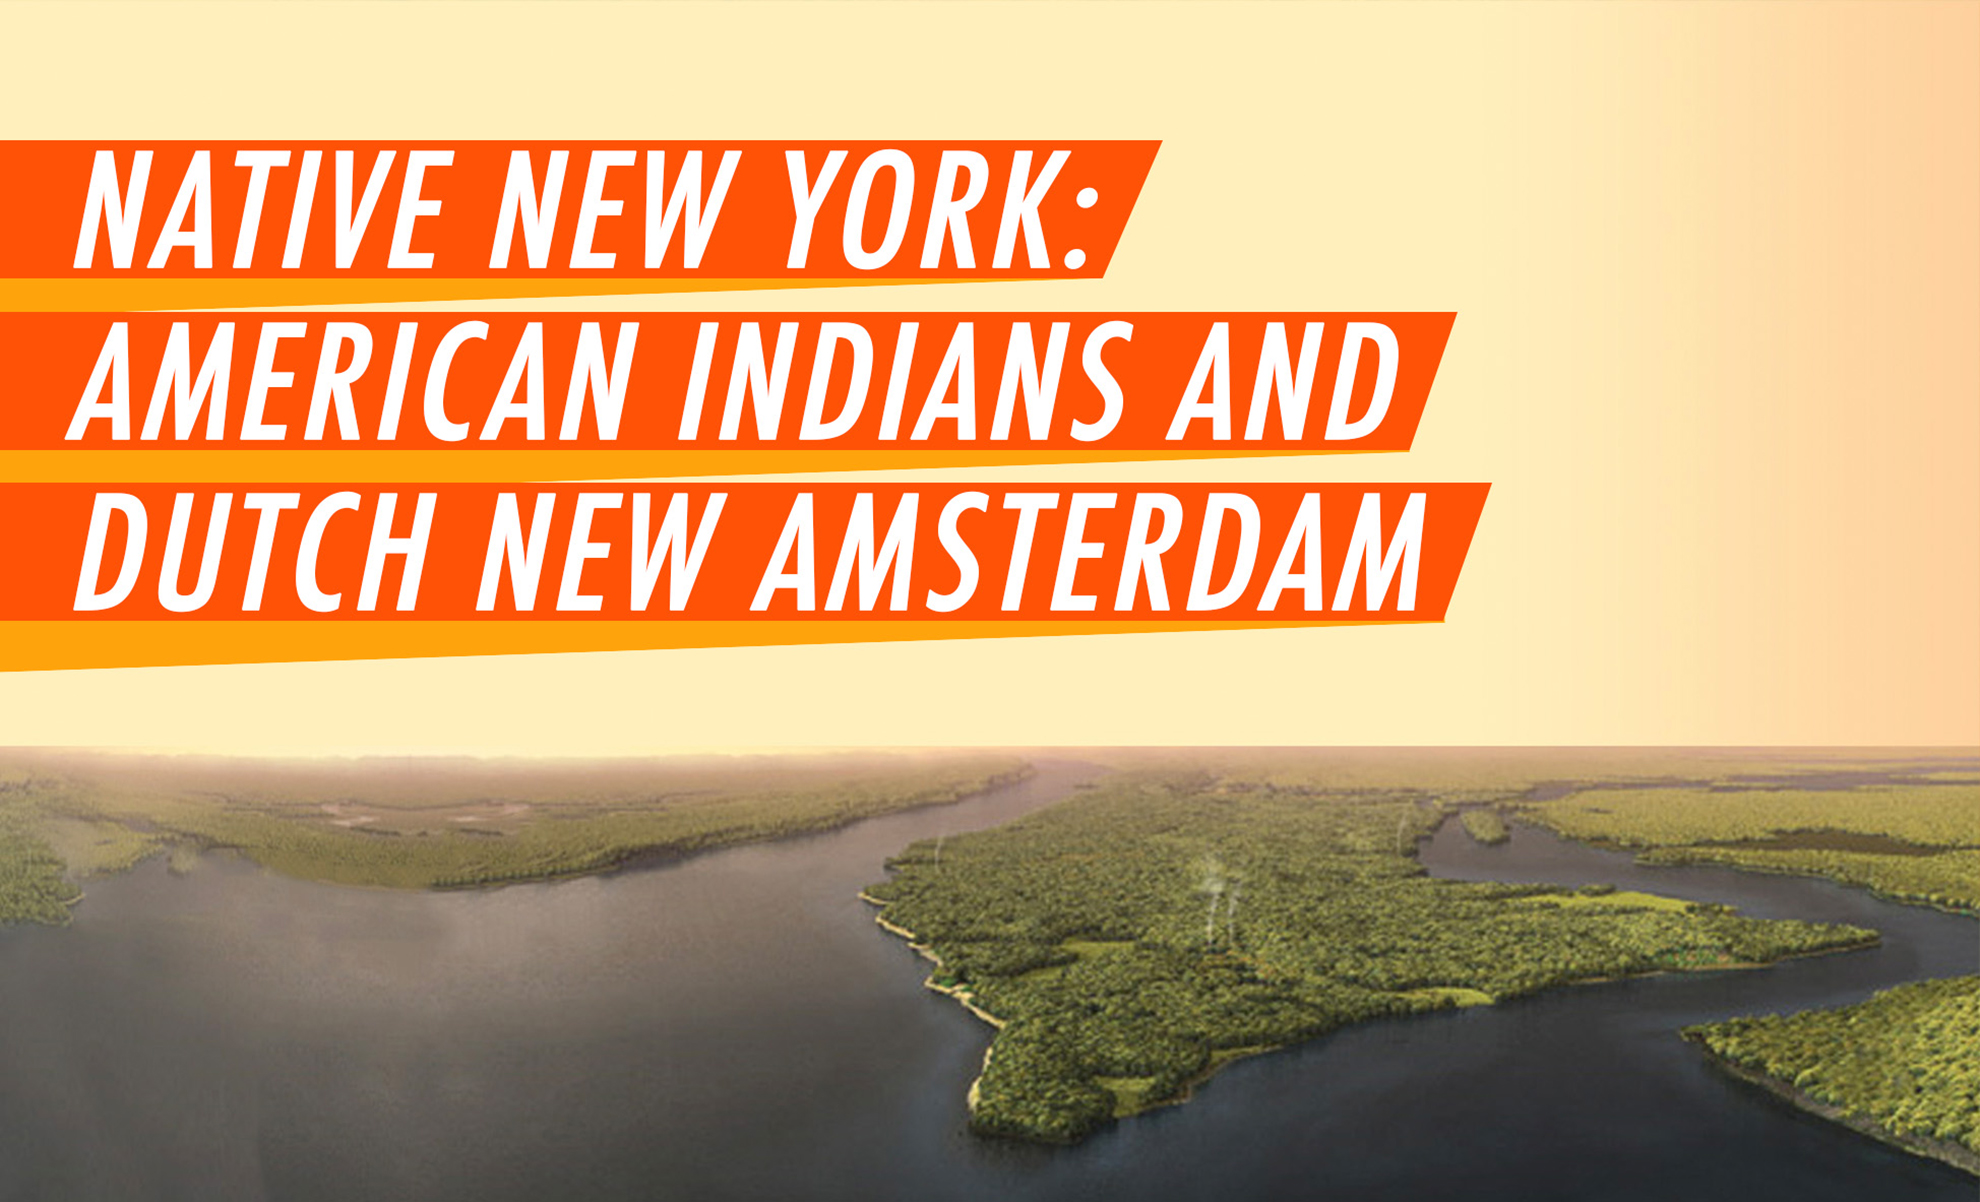  Native New York: American Indians and Dutch New Amsterdam